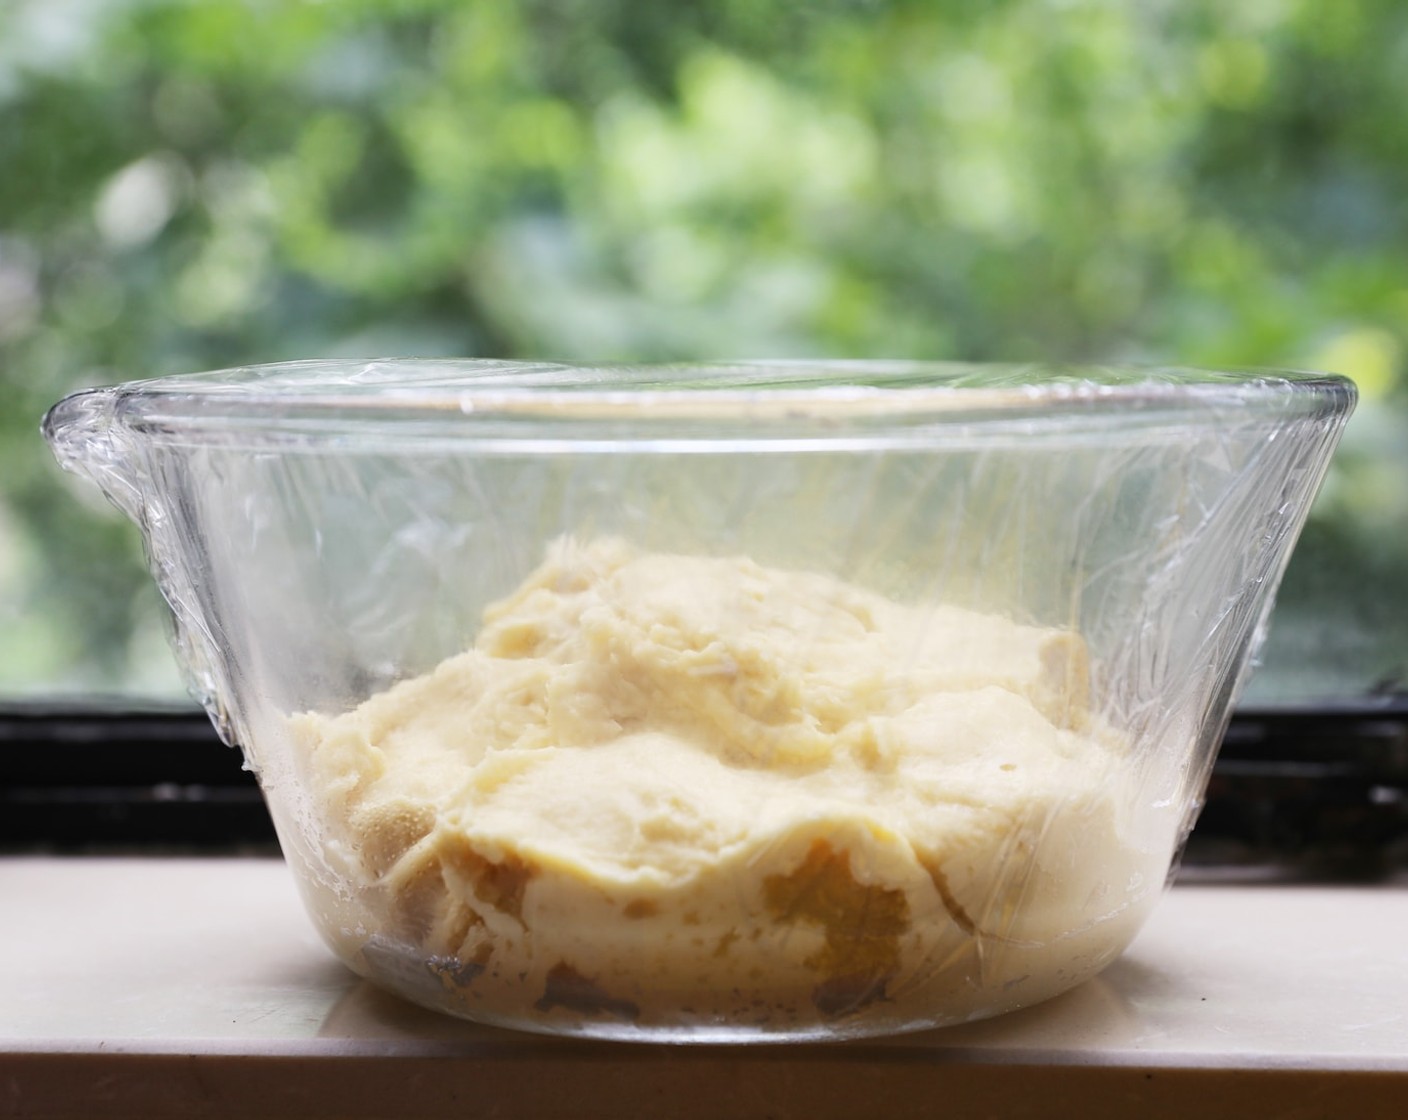 step 8 Place the dough in an oiled bowl and cover with plastic wrap. Leave it in a warm place to rise for about 2-3 hours.